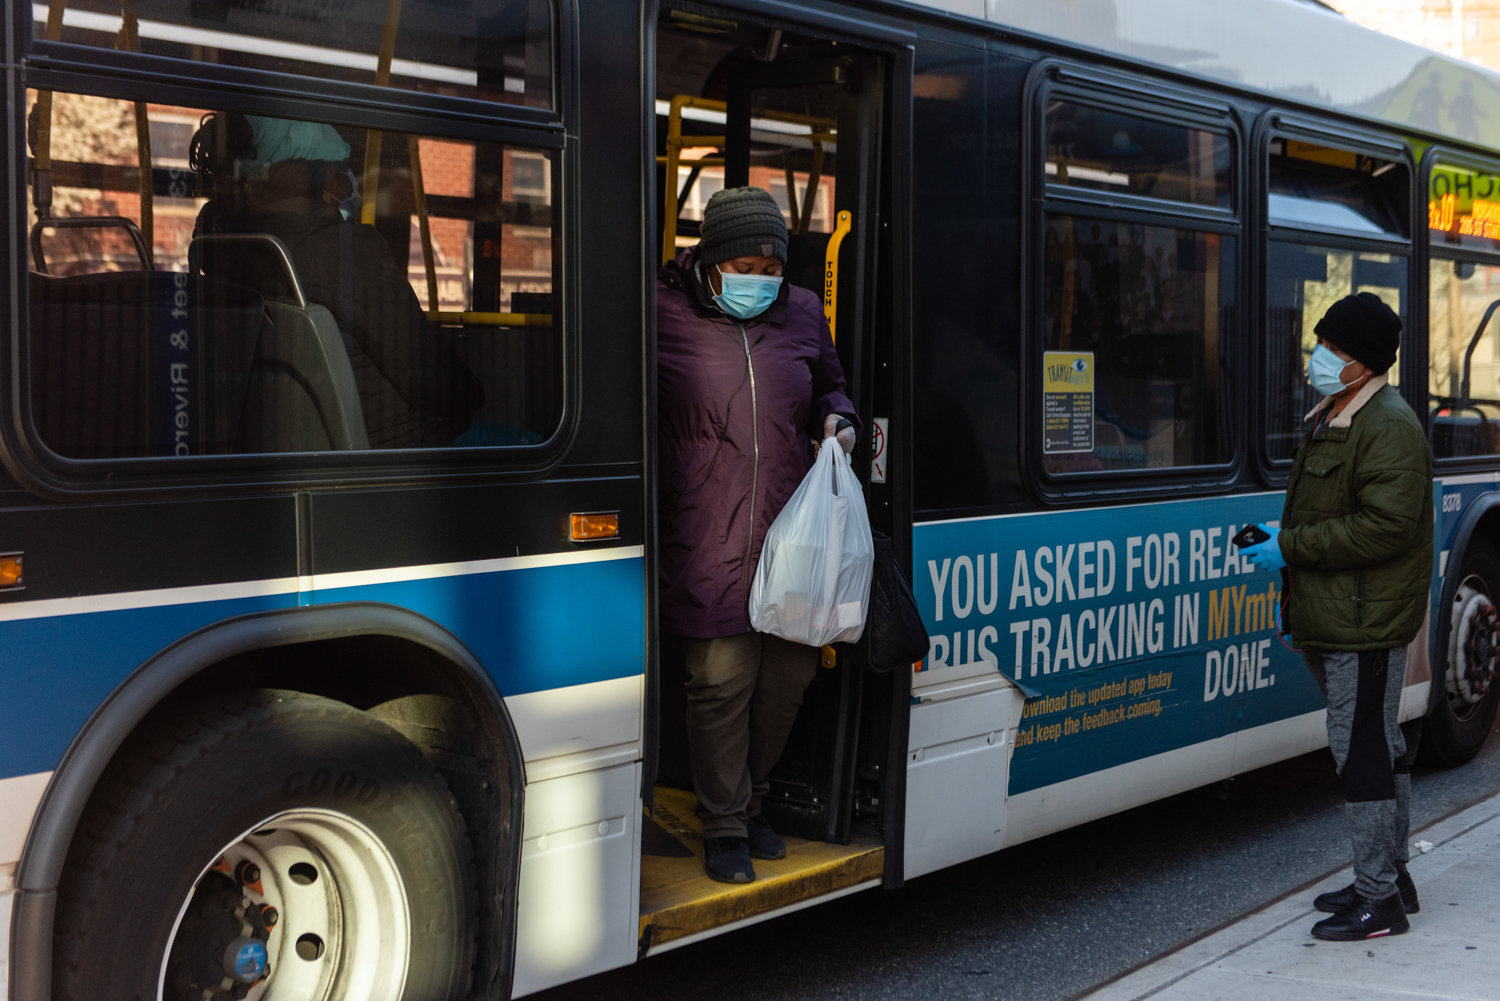 A commuter with a face mask disembarks from a Bx10 bus while another commuter waits on the street. It was a sign of life continuing for Frida Sterenberg, who has photographed how her neighborhood has changed as a result of the state’s shutdown in response to the coronavirus pandemic.